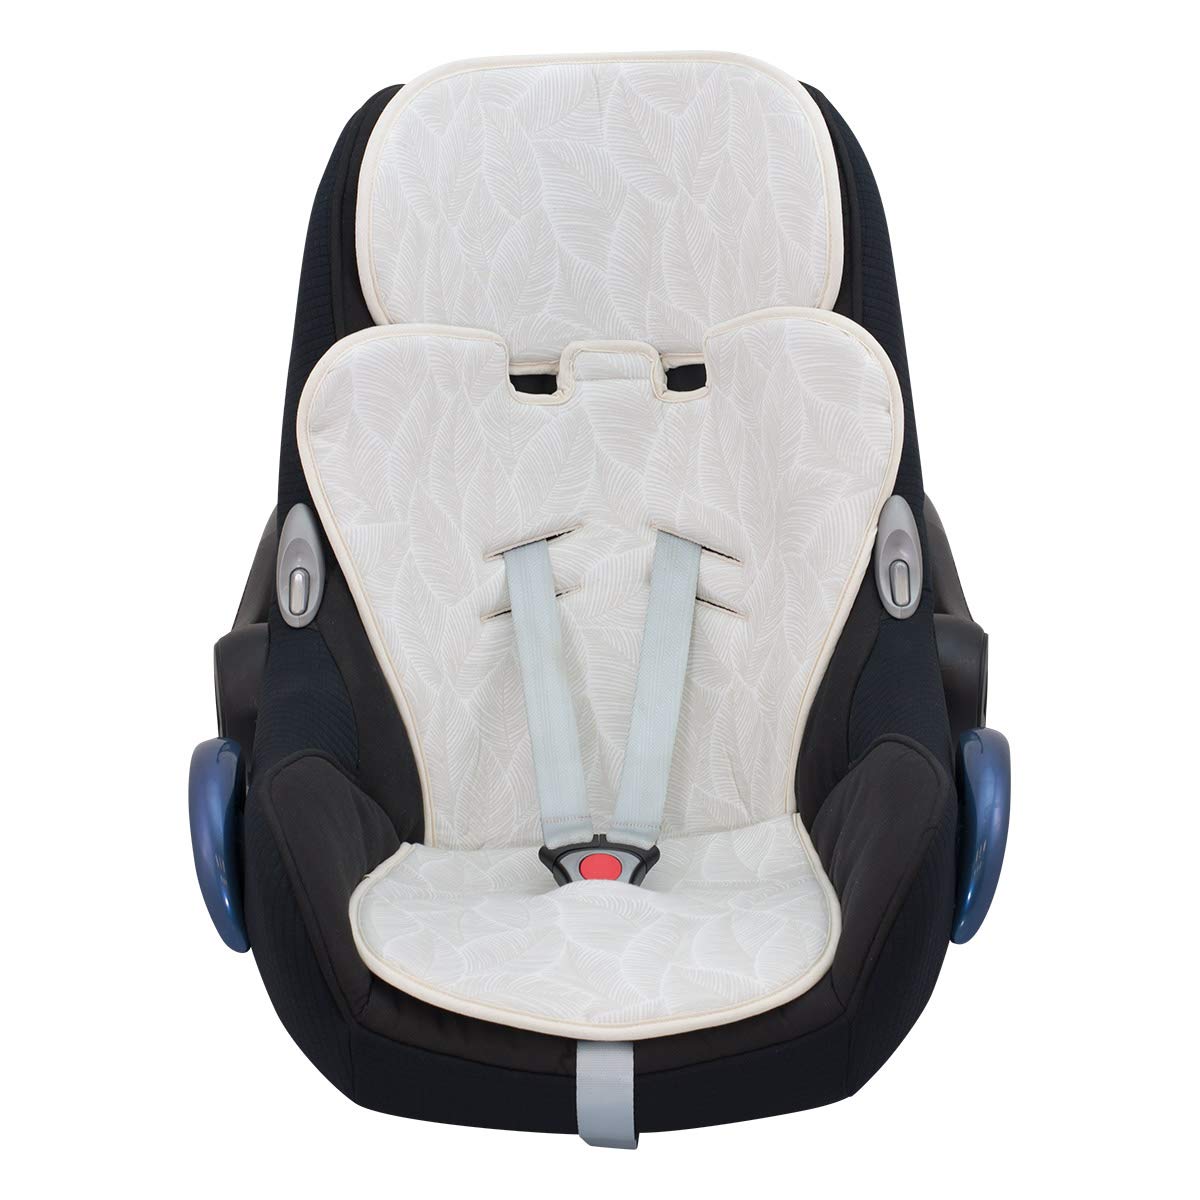 JANABEBE Car Seat Cover Size 1 2 3 (Bloom)